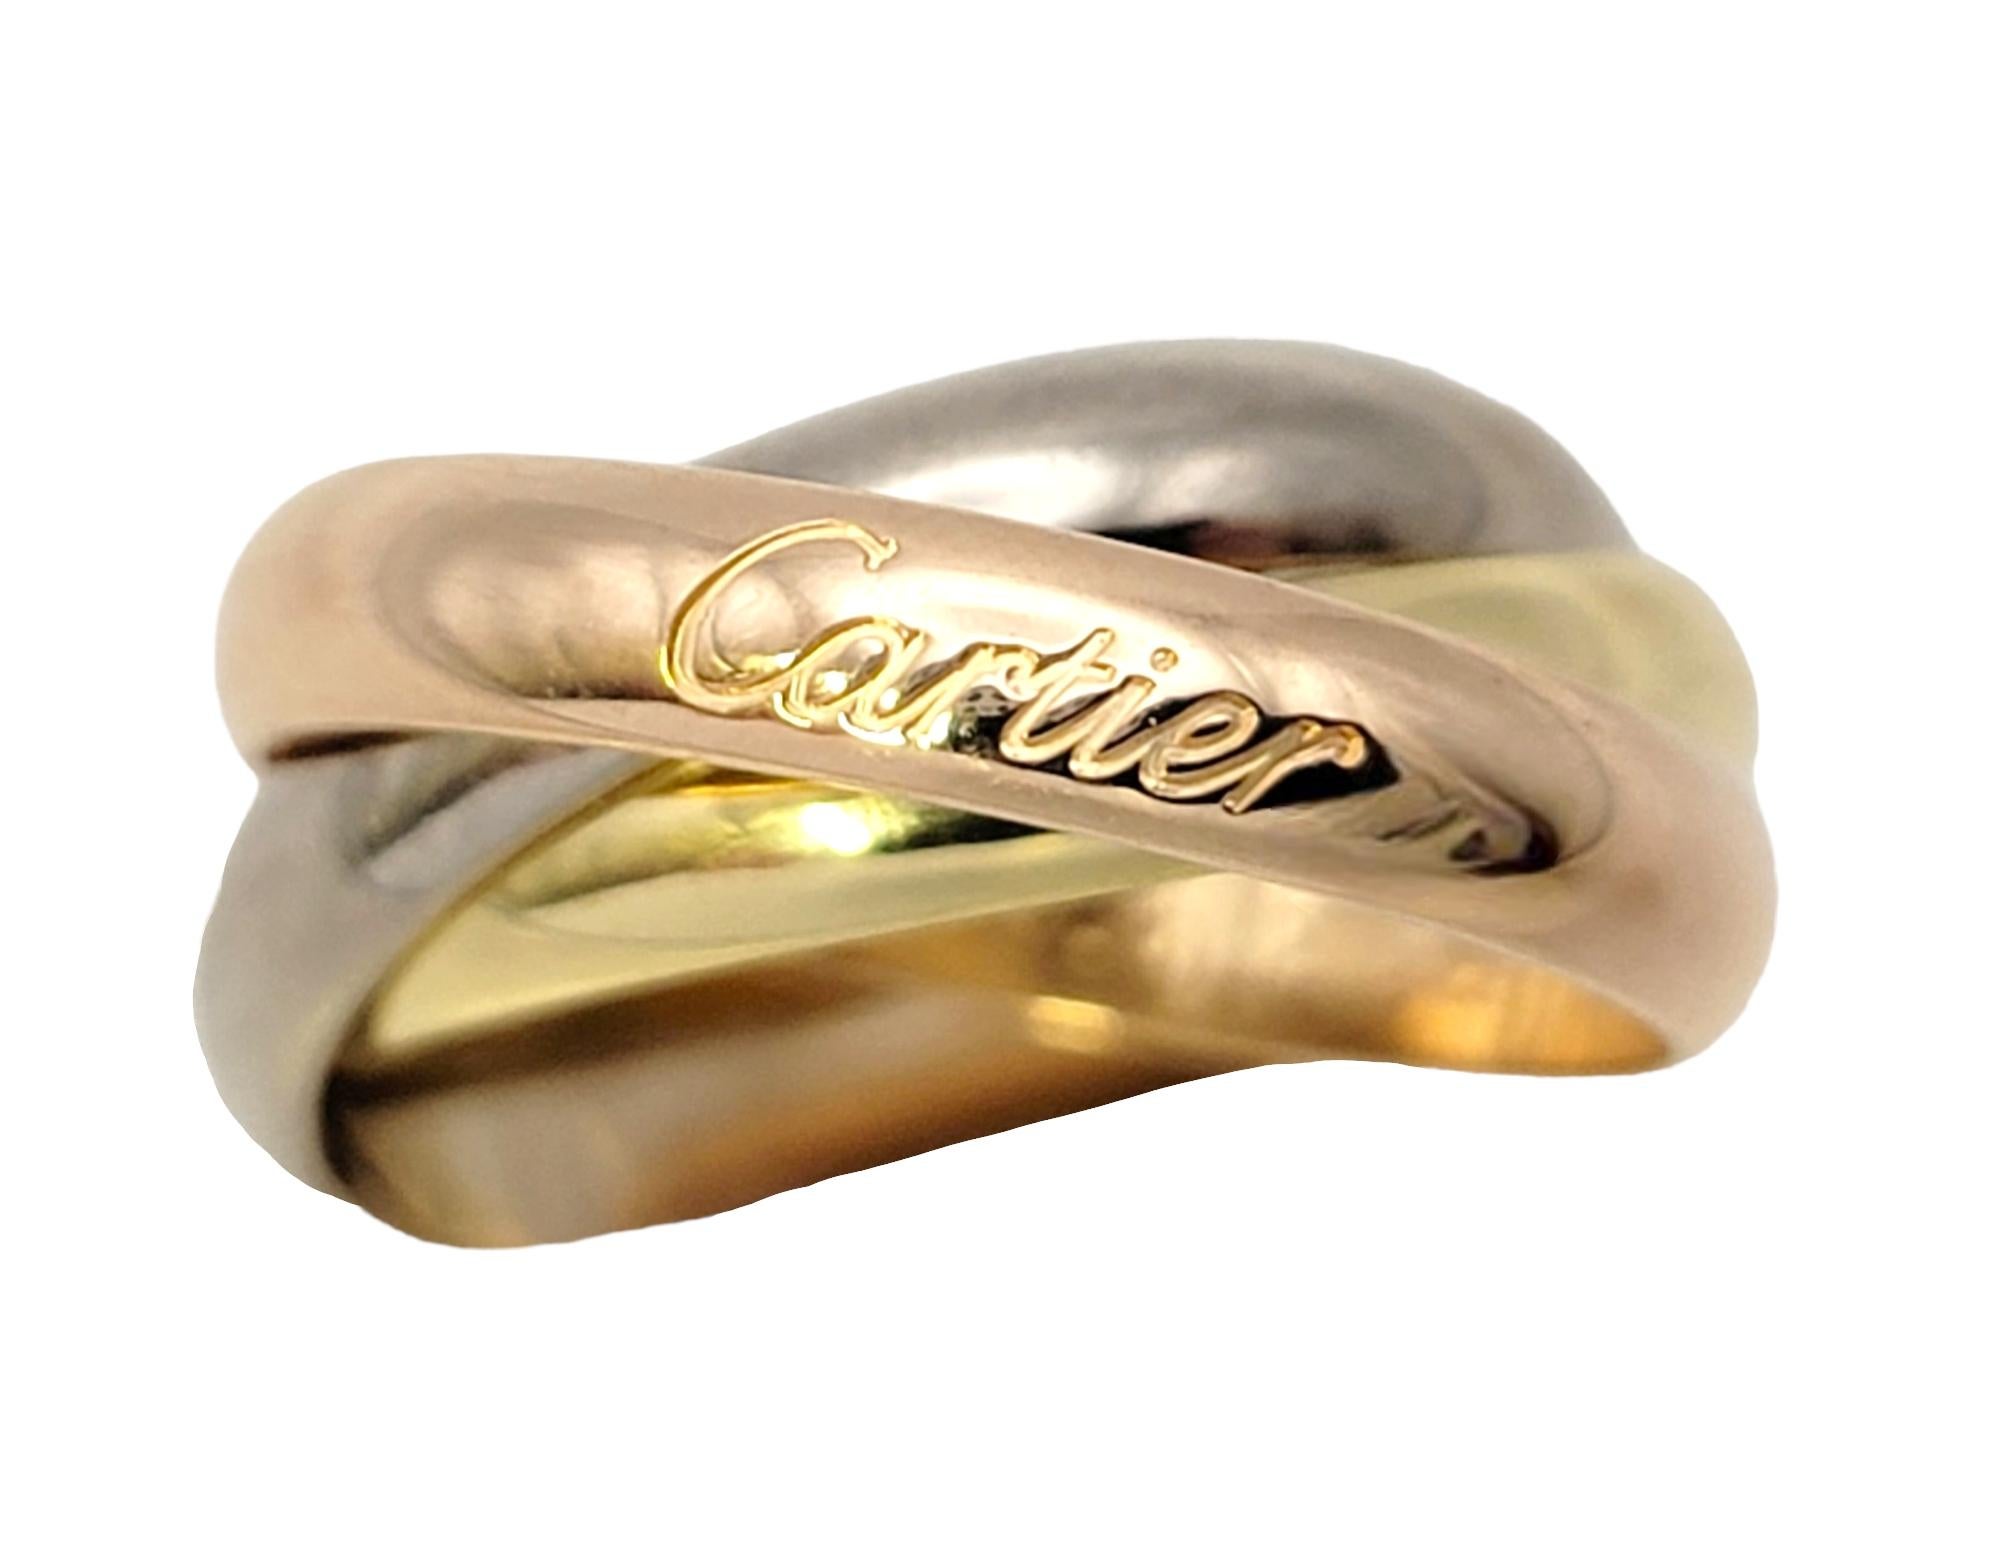 Ring size: 52 (US 6)

Sophisticated tri-color trinity band ring from Cartier is the perfect everyday piece. Cartier is a French high-end luxury goods company that designs, manufactures, distributes, and sells jewelry, leather goods, and watches. It